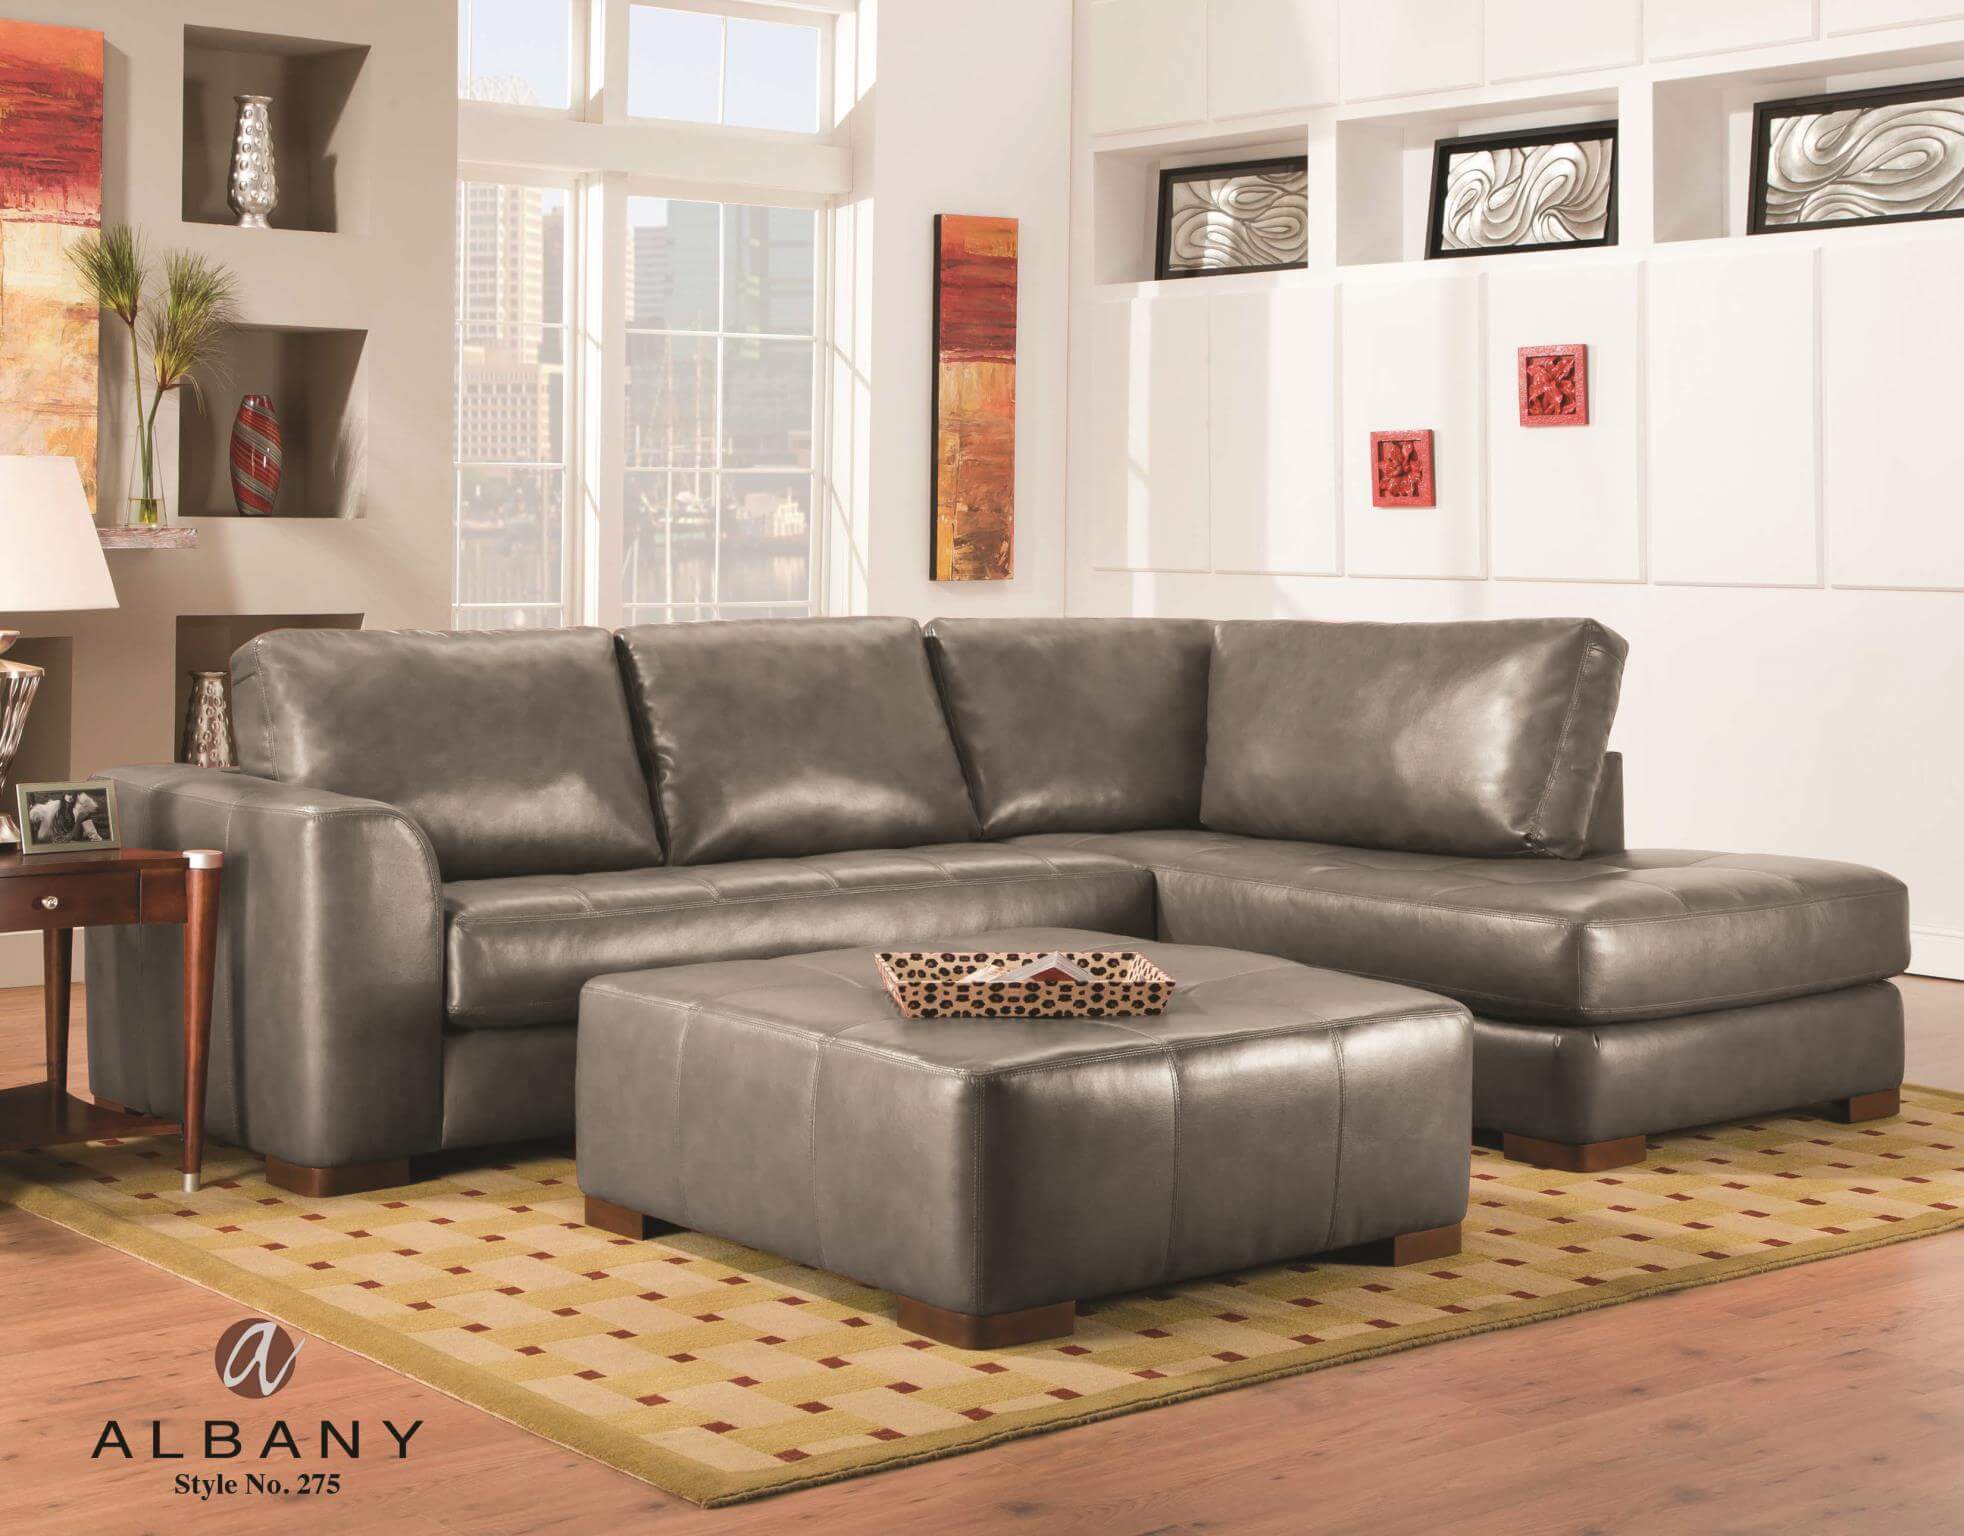 Albany 275 Como Grey 2pc Bonded Leather, Leather Sectional Clearance